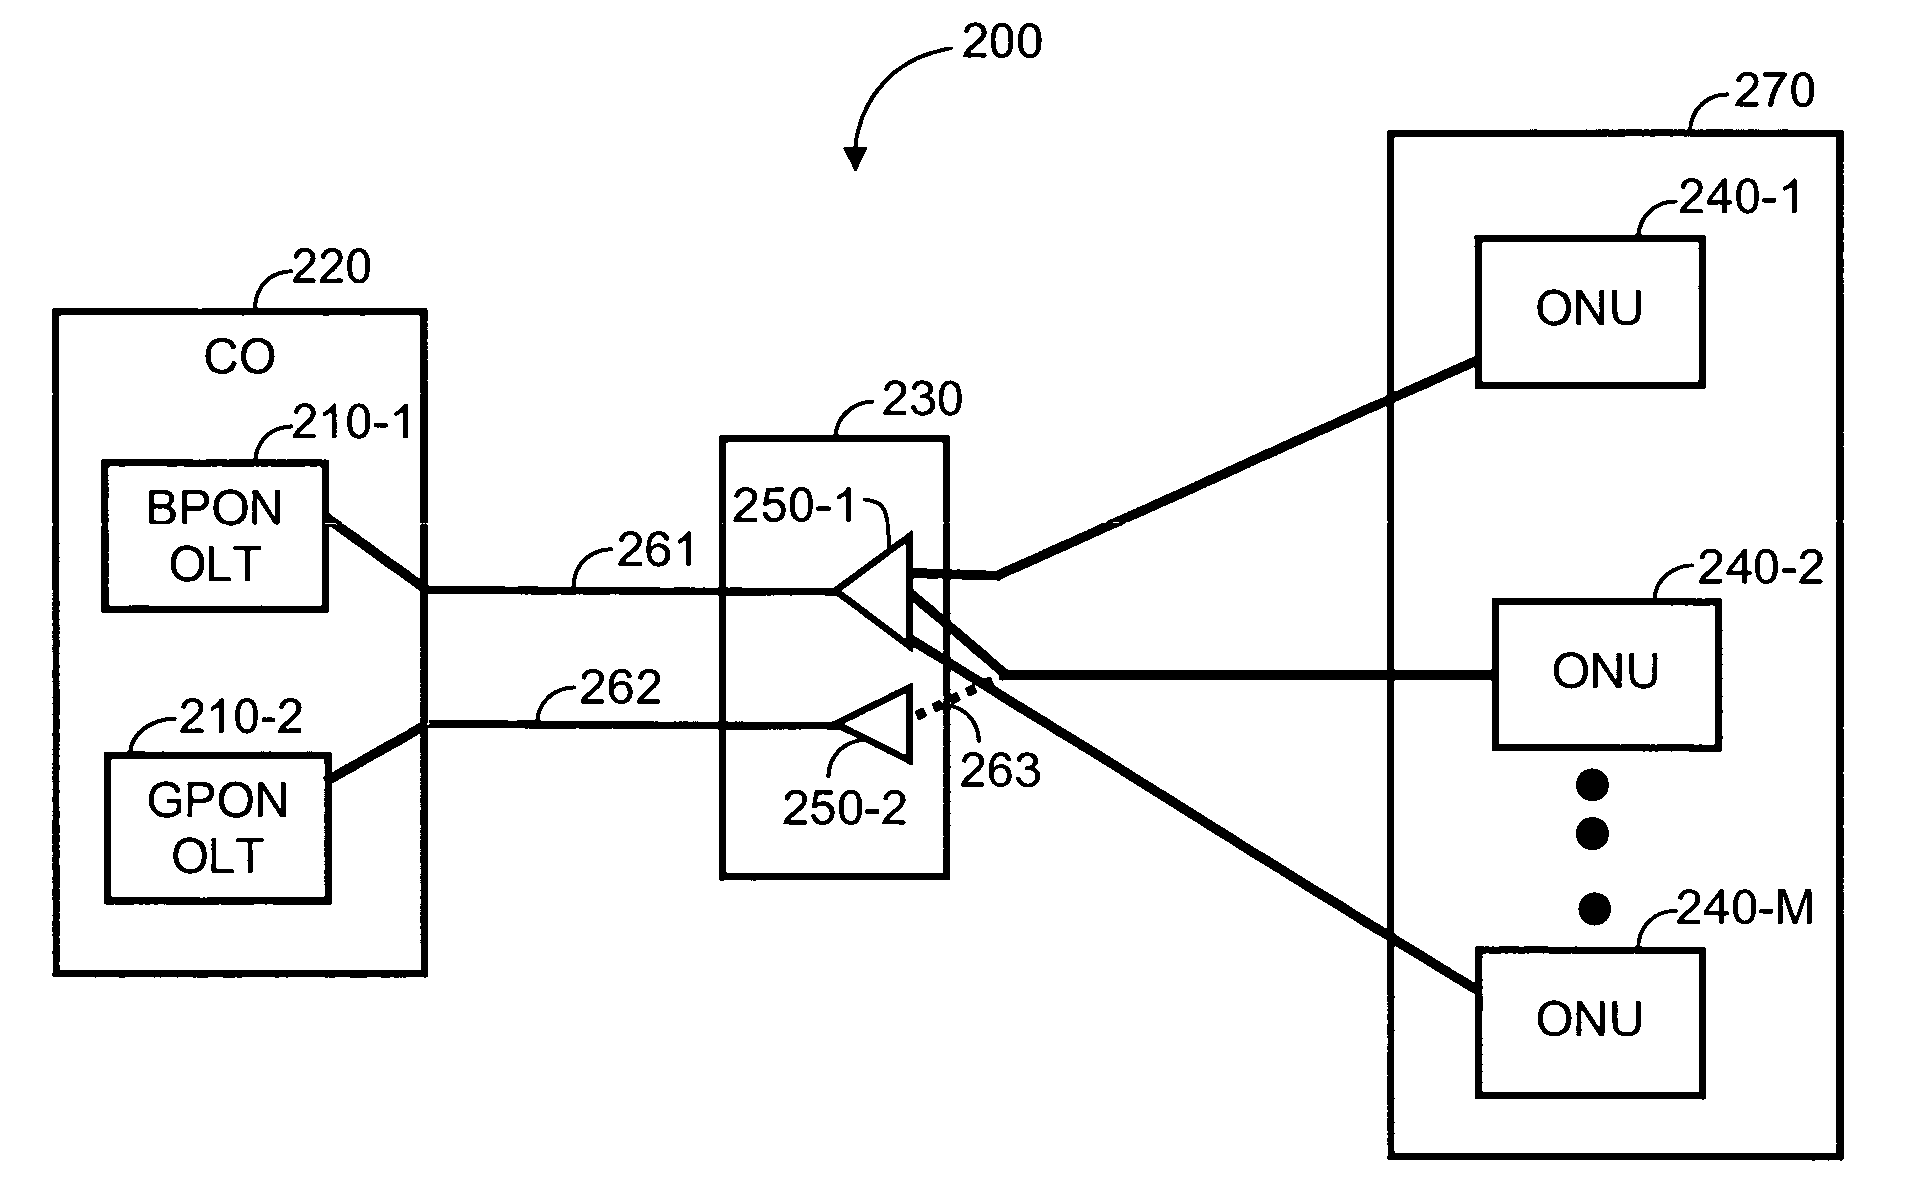 Method and apparatus for automatically upgrading passive optical networks (PONs)